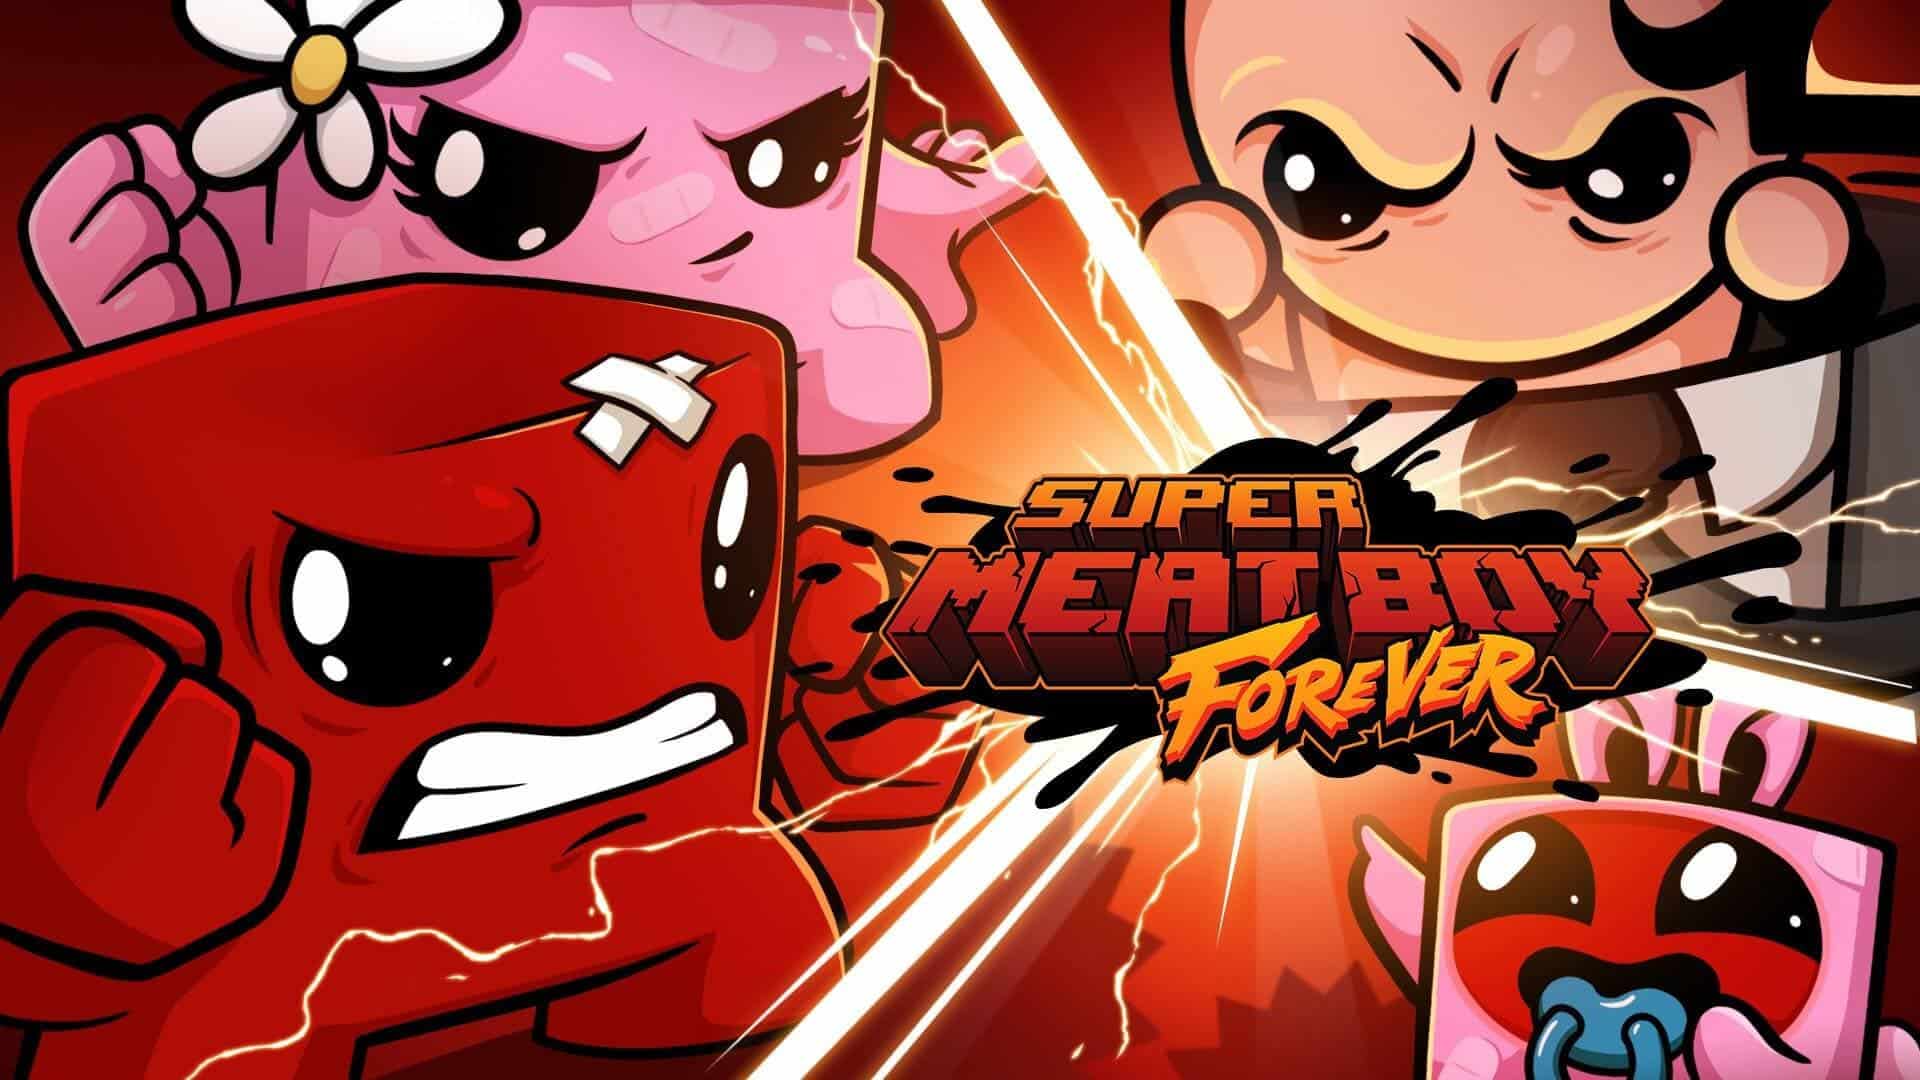 Super Meat Boy Forever Android Game